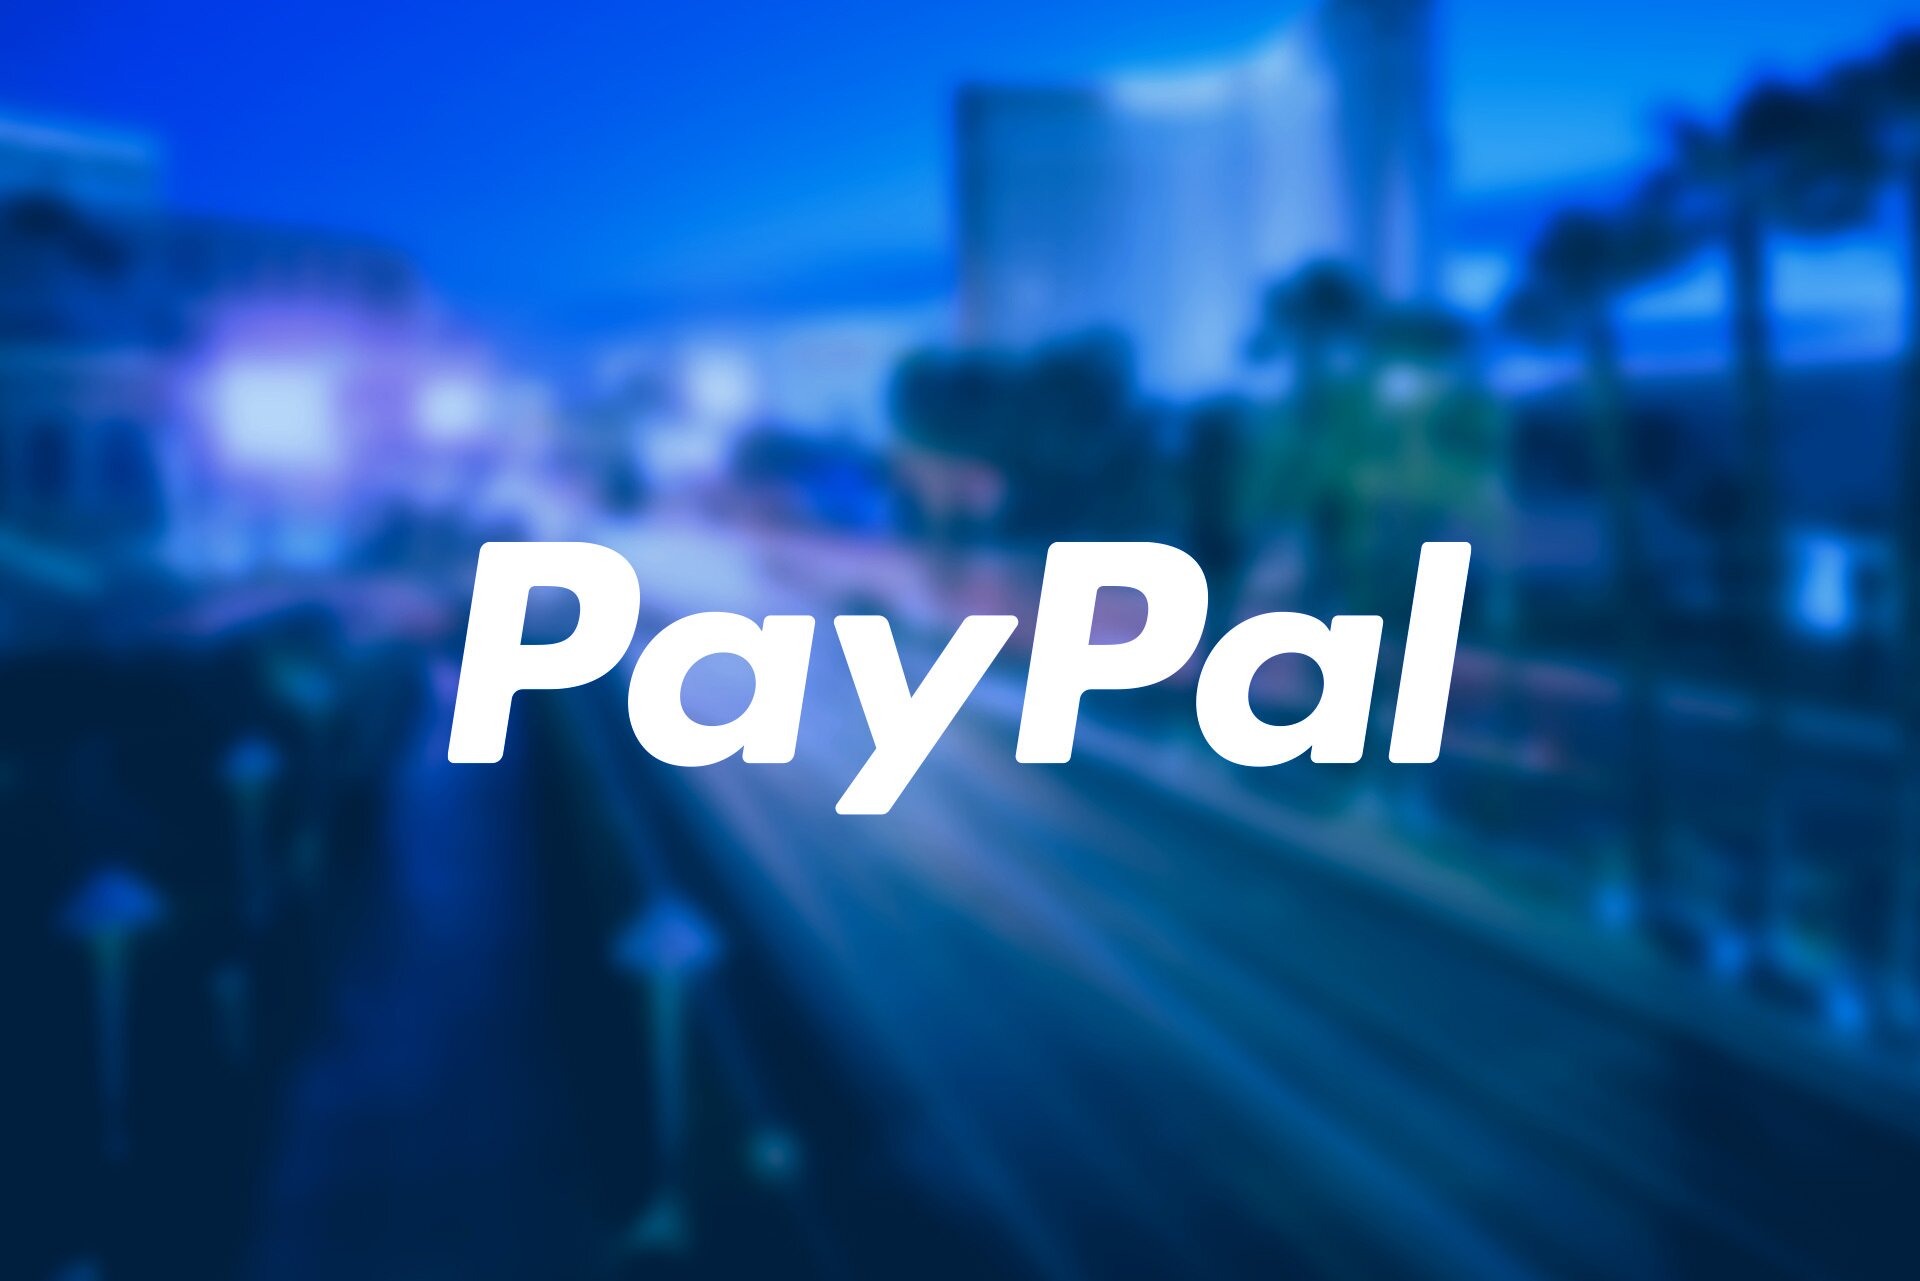 jim germany paypal contact number